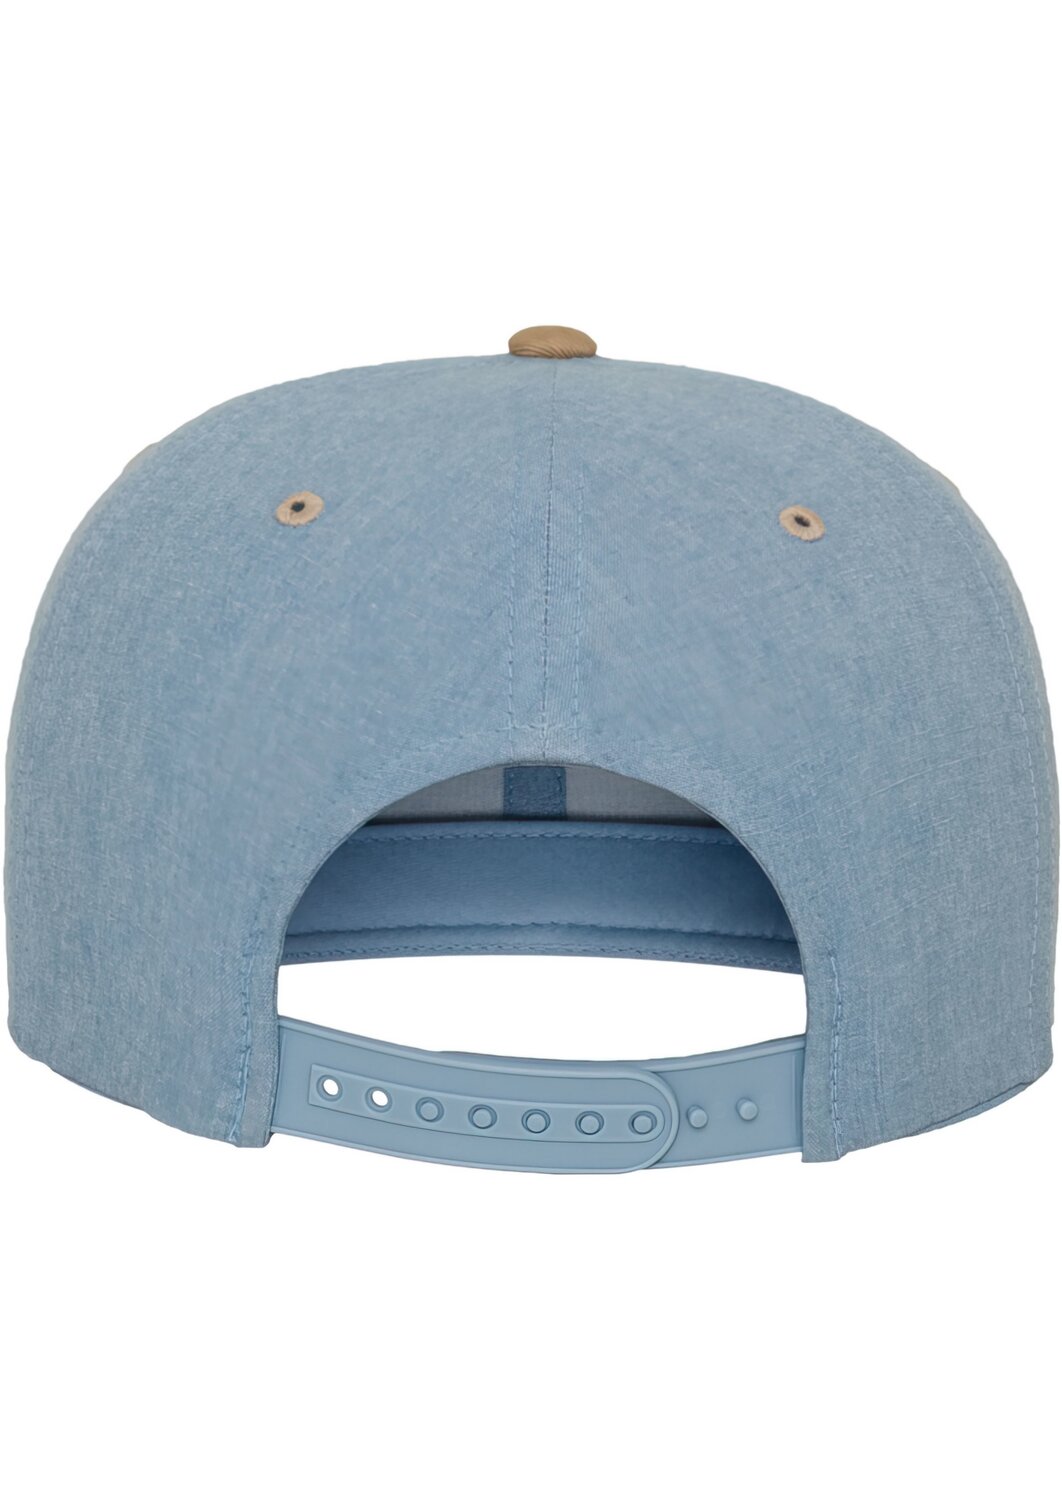 Snapback Cap Chambray-Suede Flexfit blue/beige | MAXISCOOT